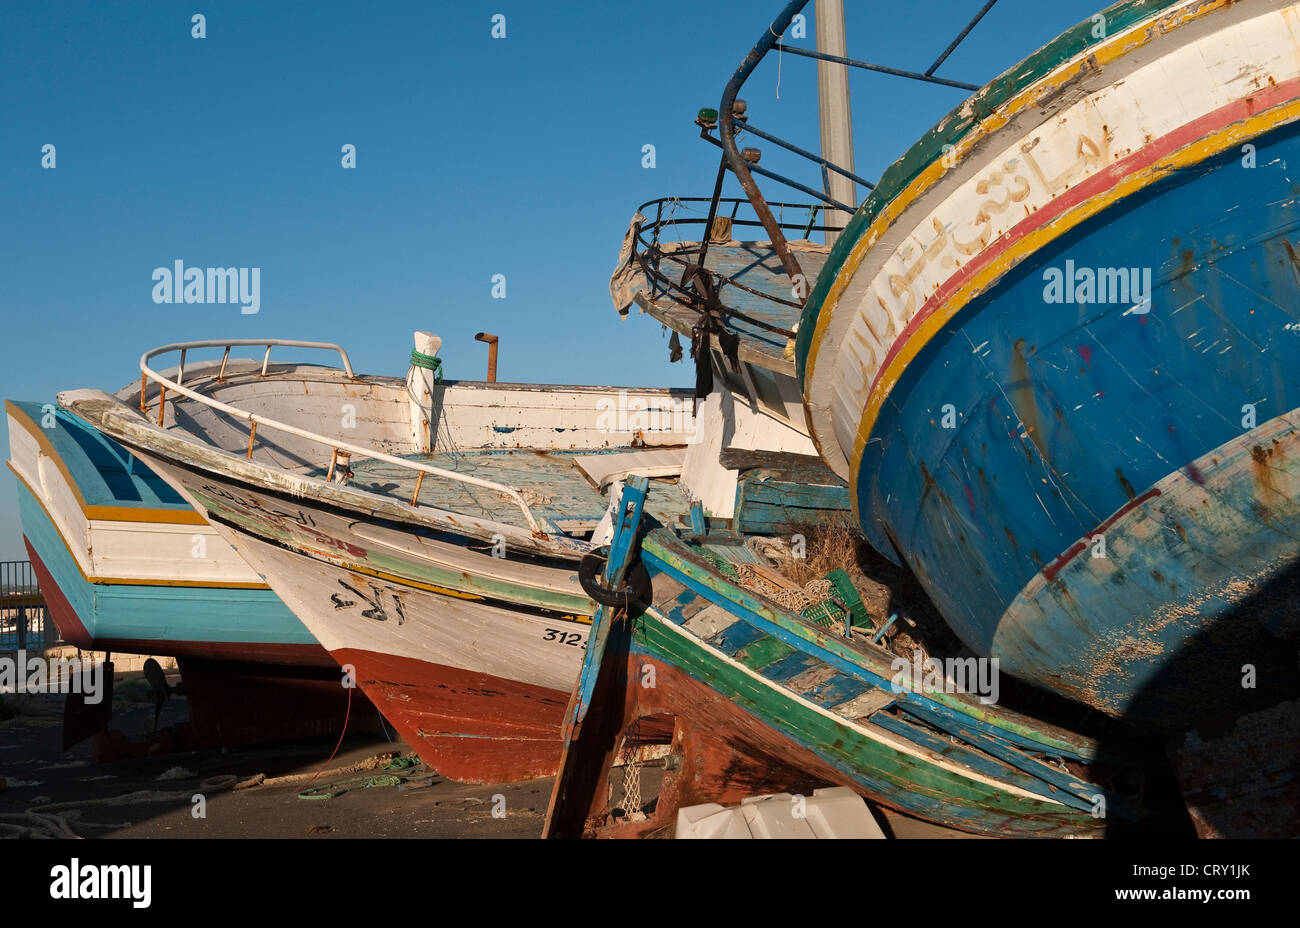 https://c8.alamy.com/comp/CRY1JK/old-fishing-boats-used-by-refugees-to-cross-the-mediterranean-from-CRY1JK.jpg